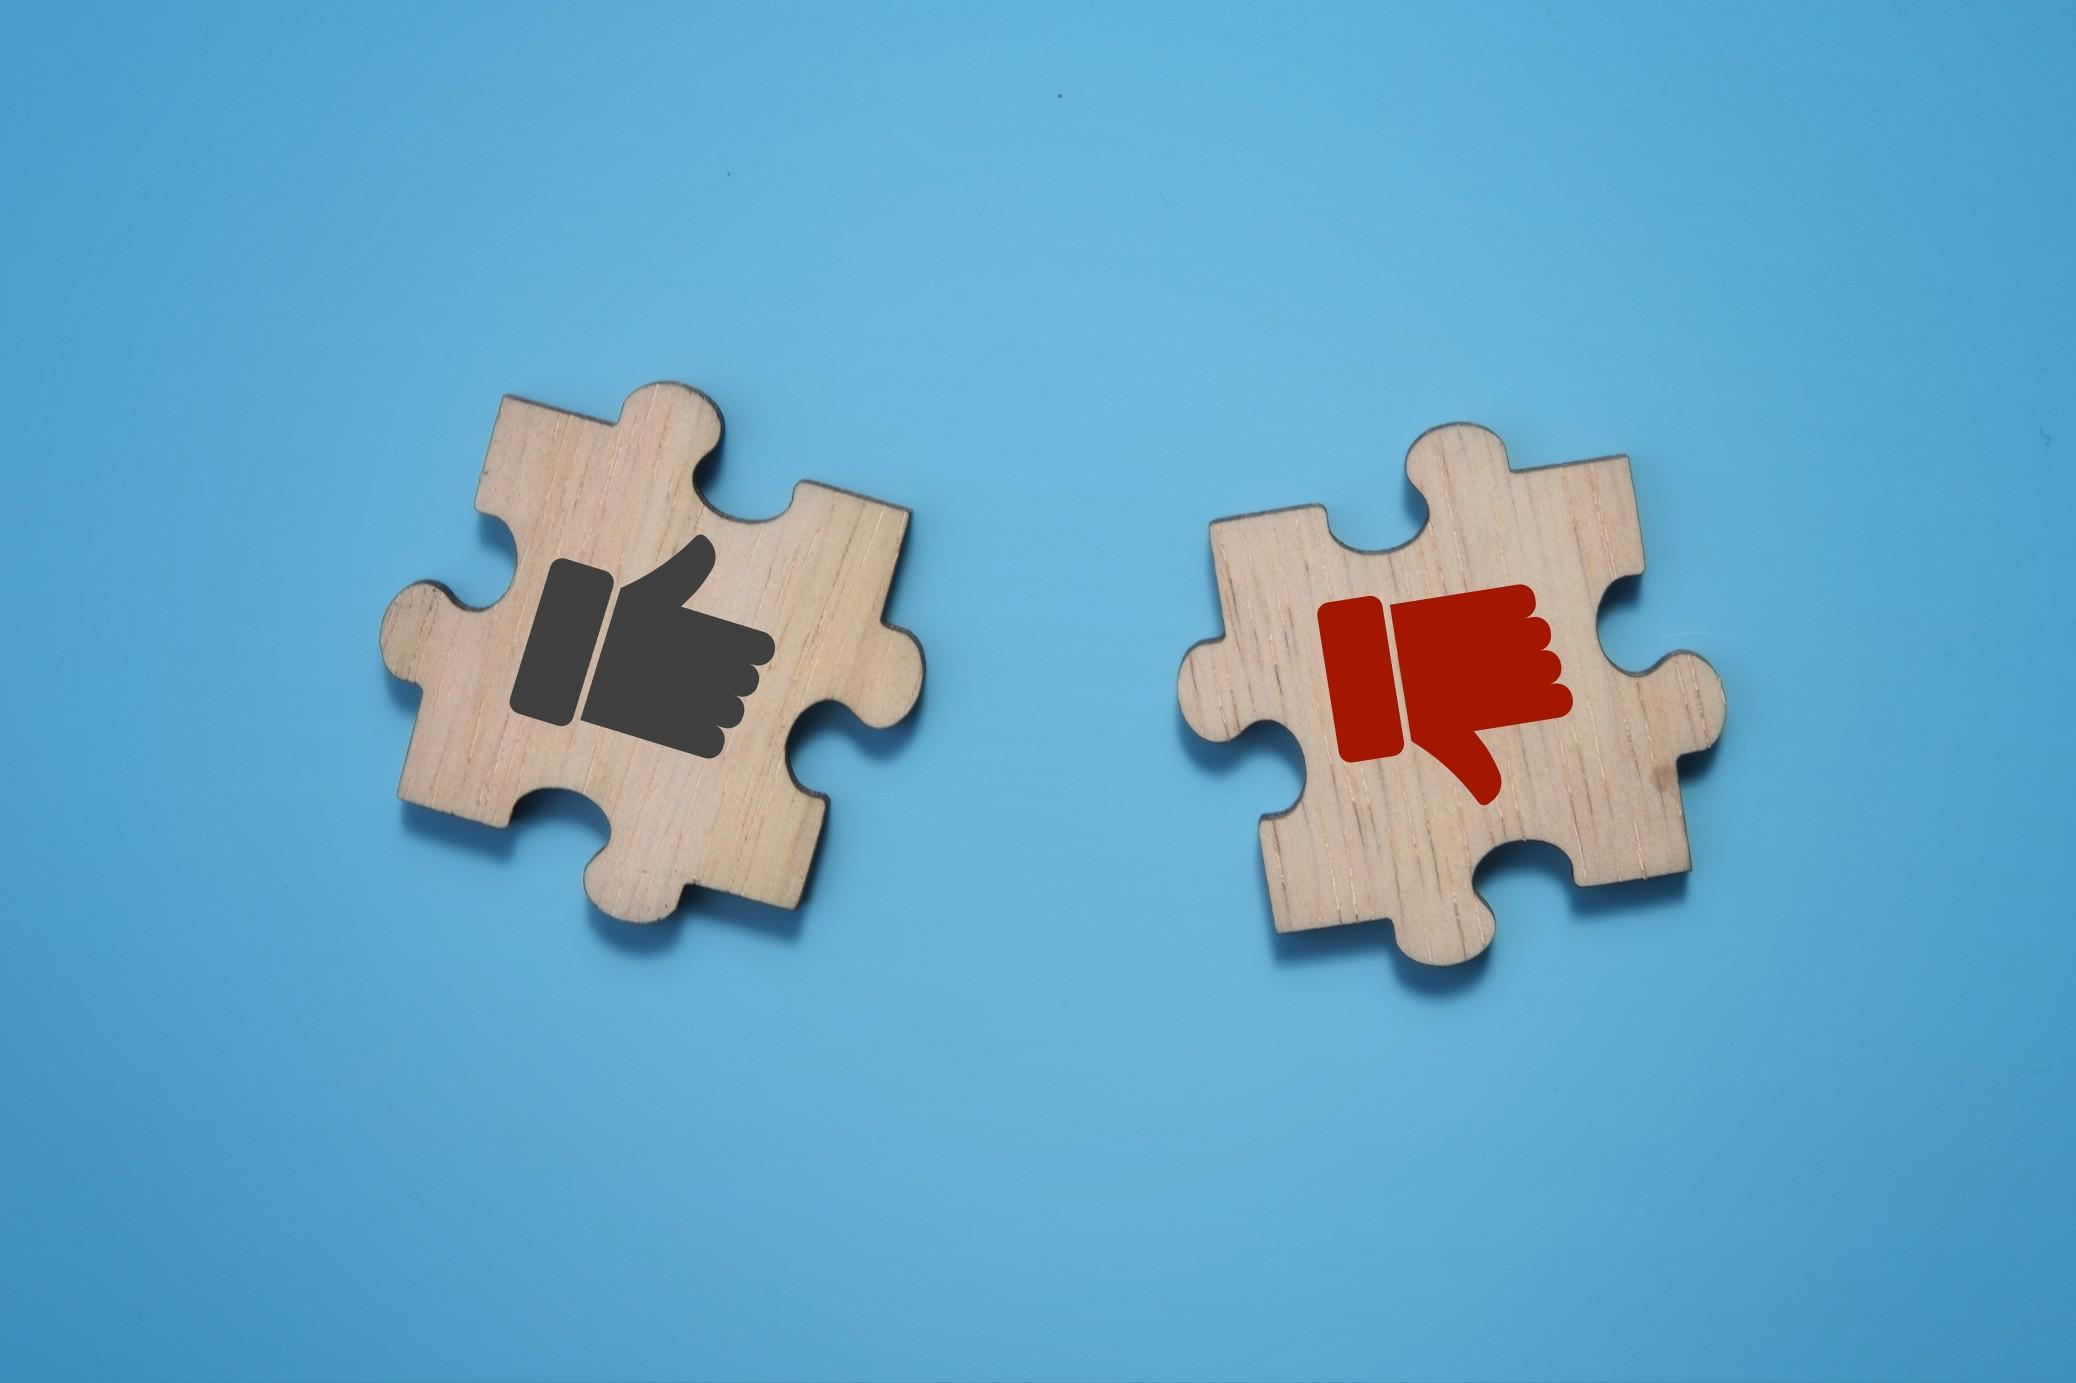 A black thumbs-up symbol and a red thumbs-down in two wood puzzle pieces on a blue background